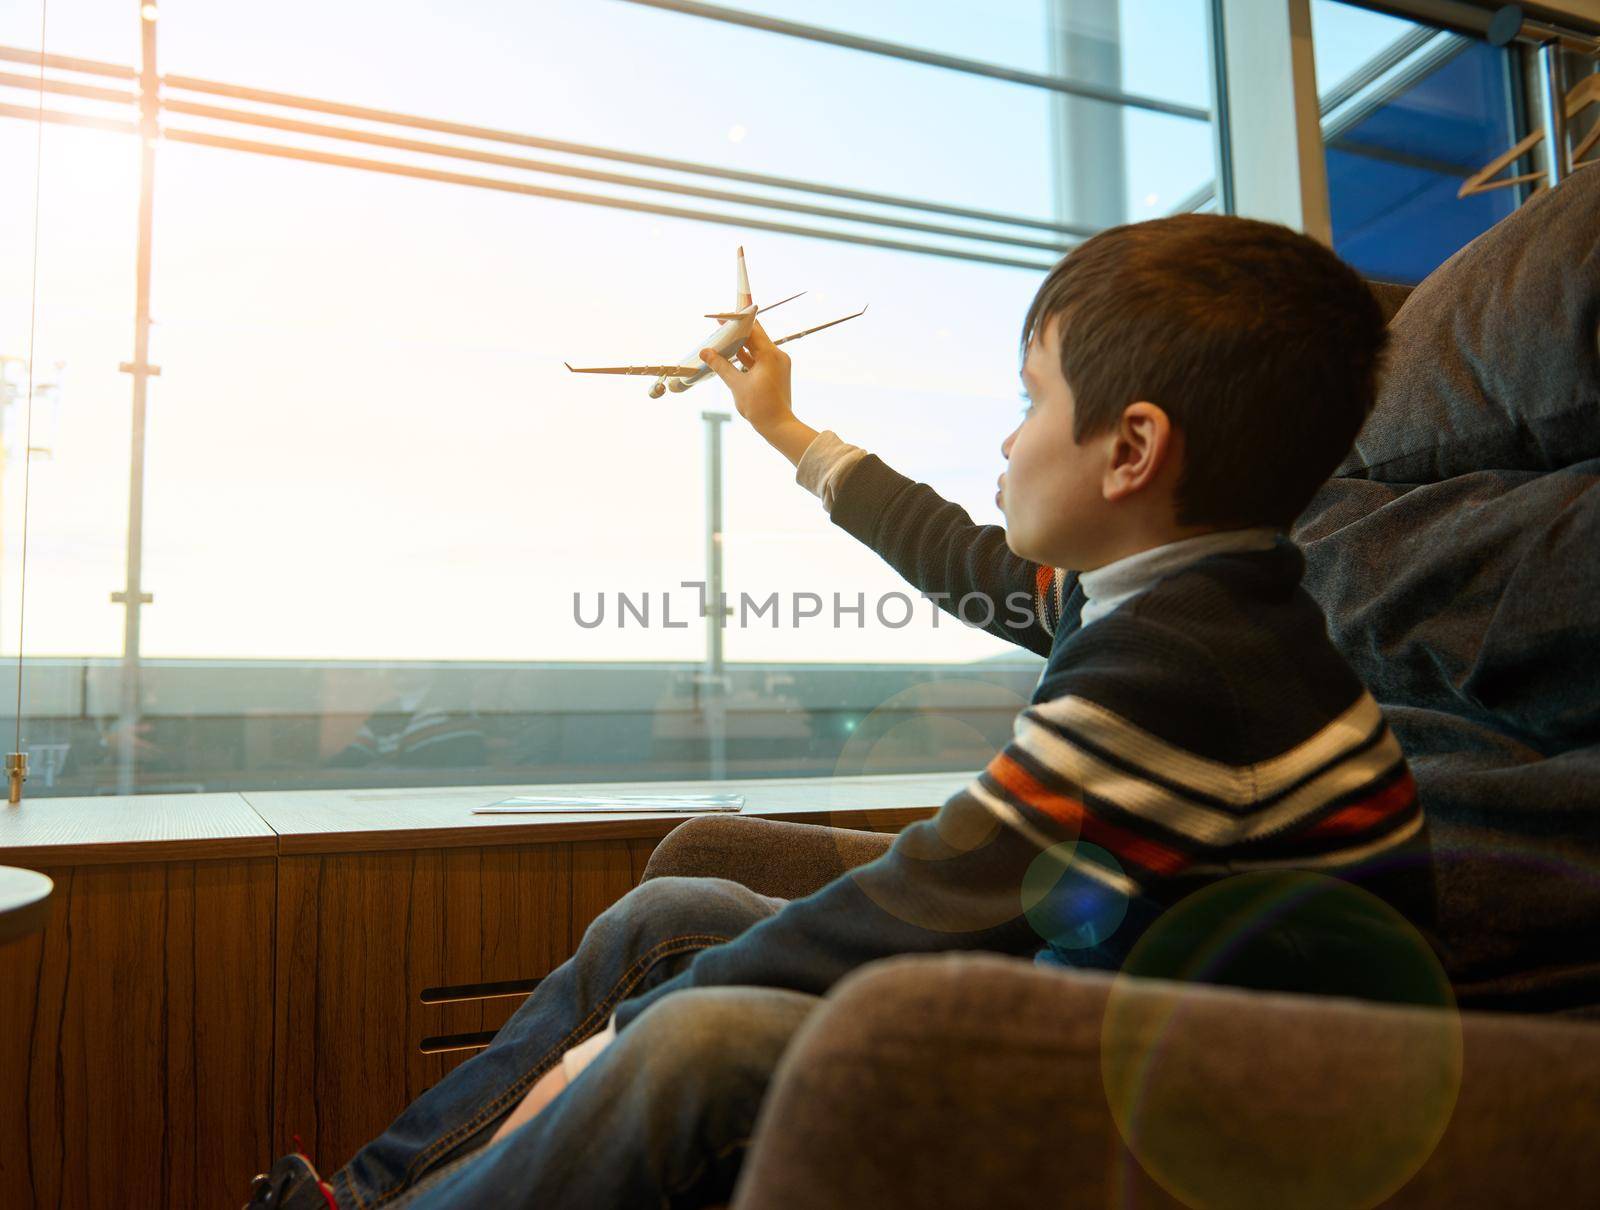 Portrait of adorable child boy holding a toy airplane in outstretched hand imitating flight, against panoramic windows overlooking the runway in the airport departure terminal while waiting for flight